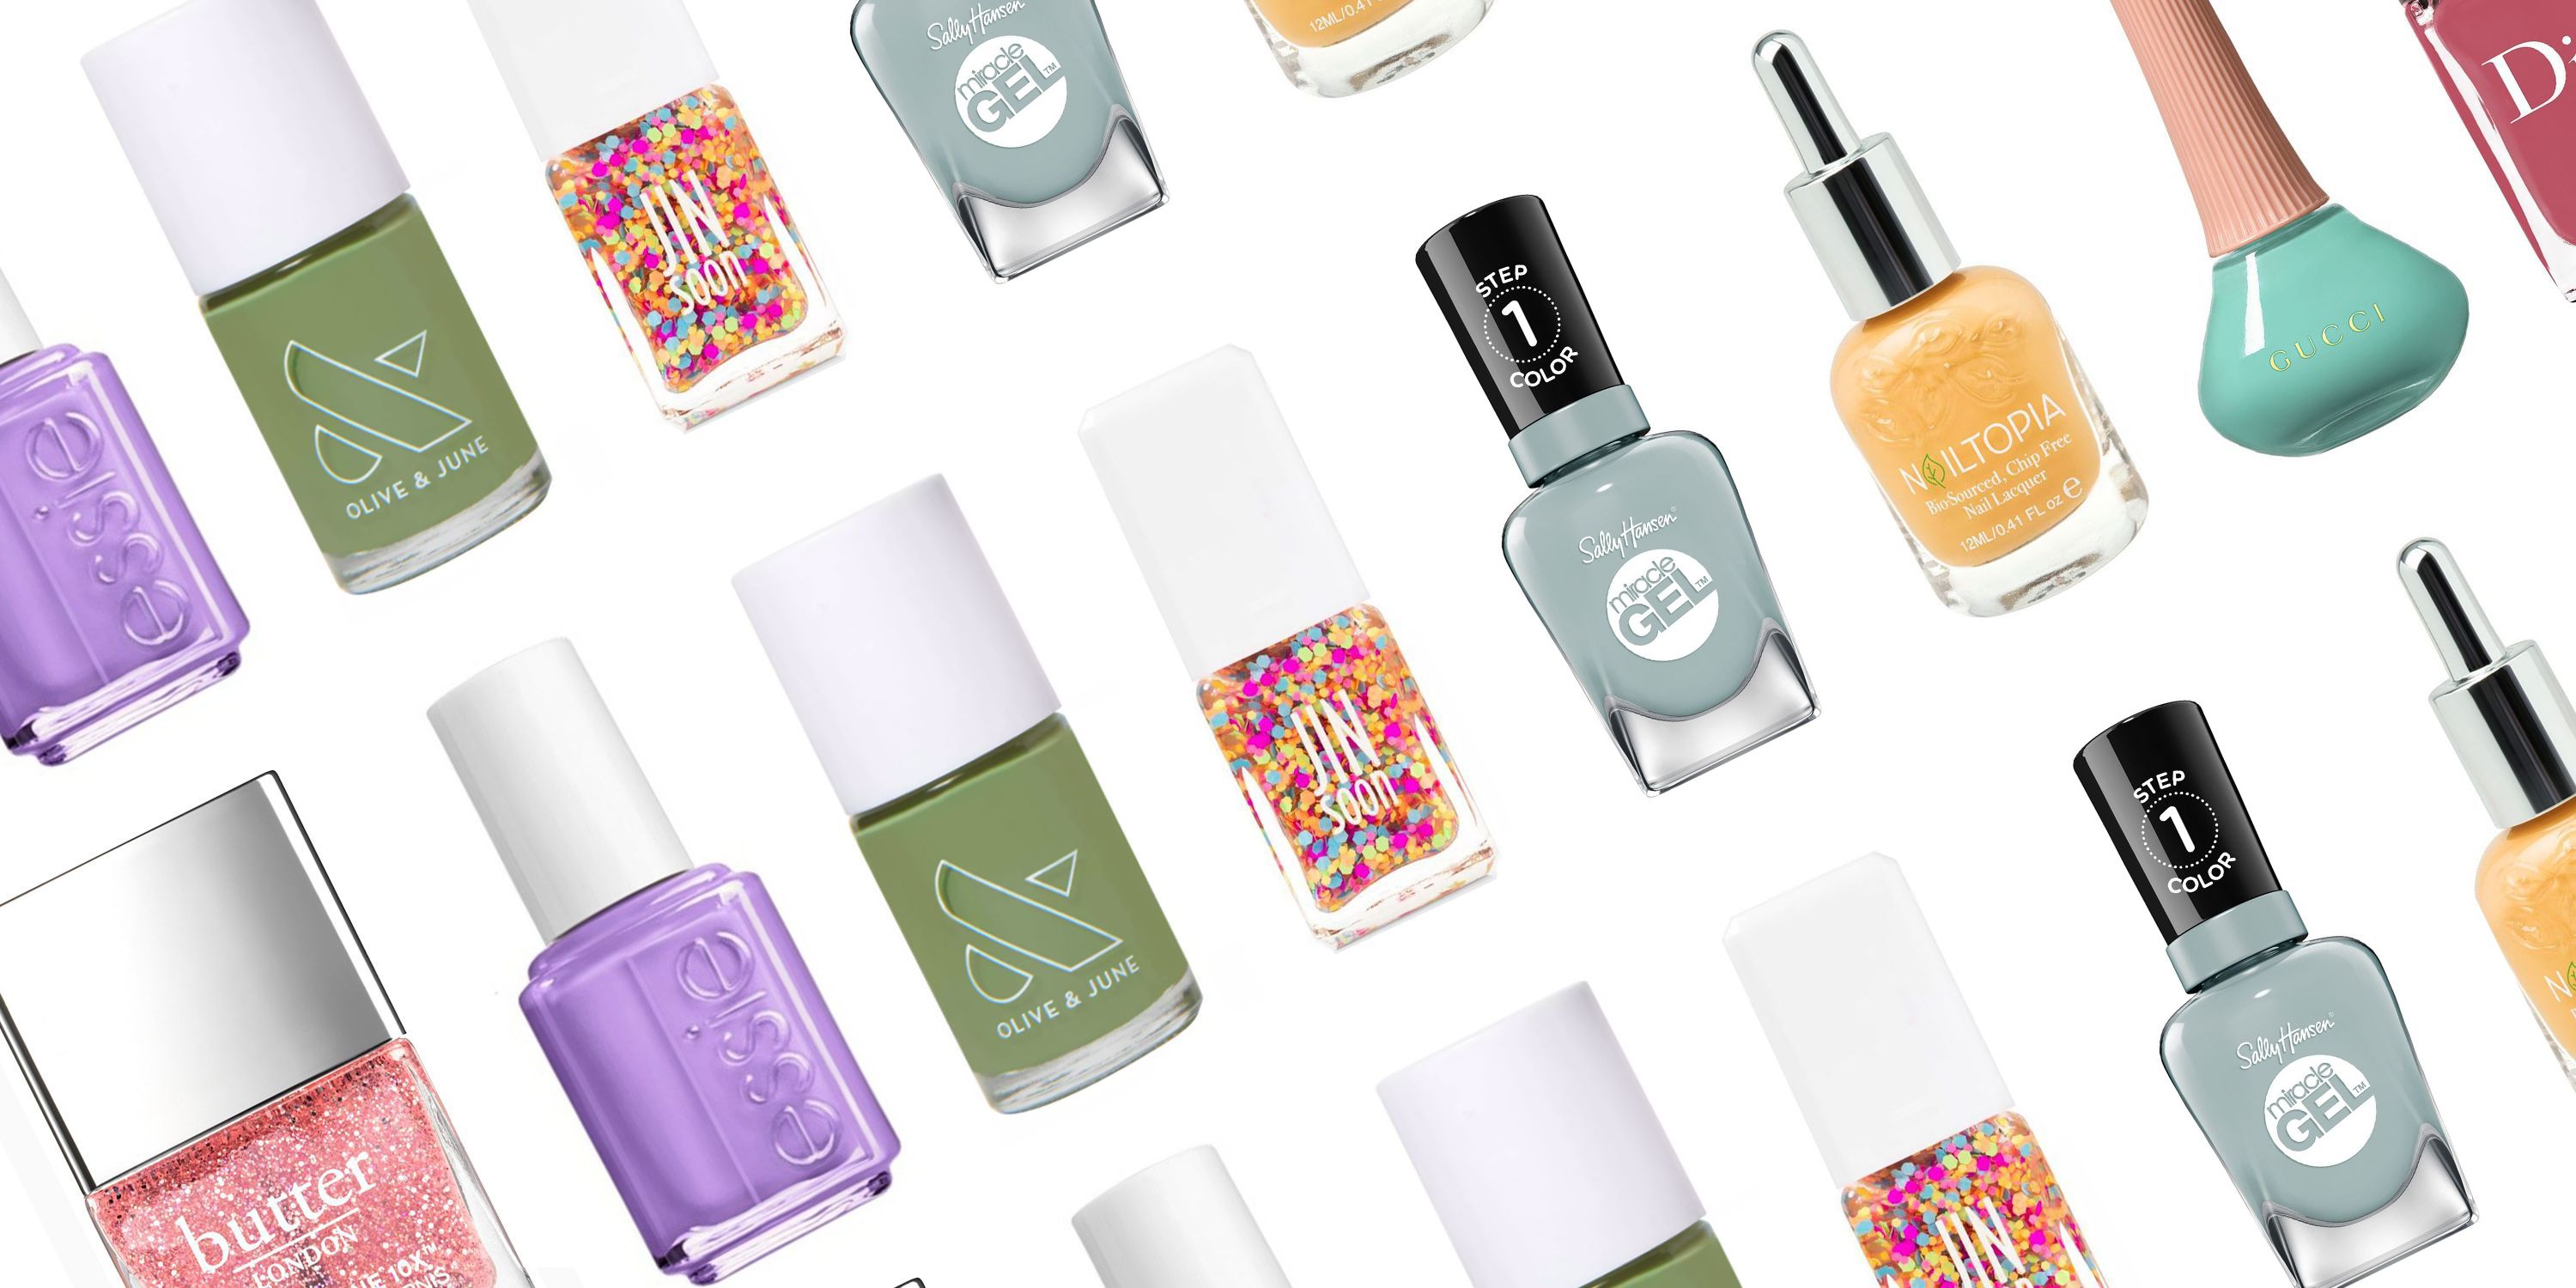 The 9 Best Nail Trends of 2022 - Nail Art, Nail Color Trends